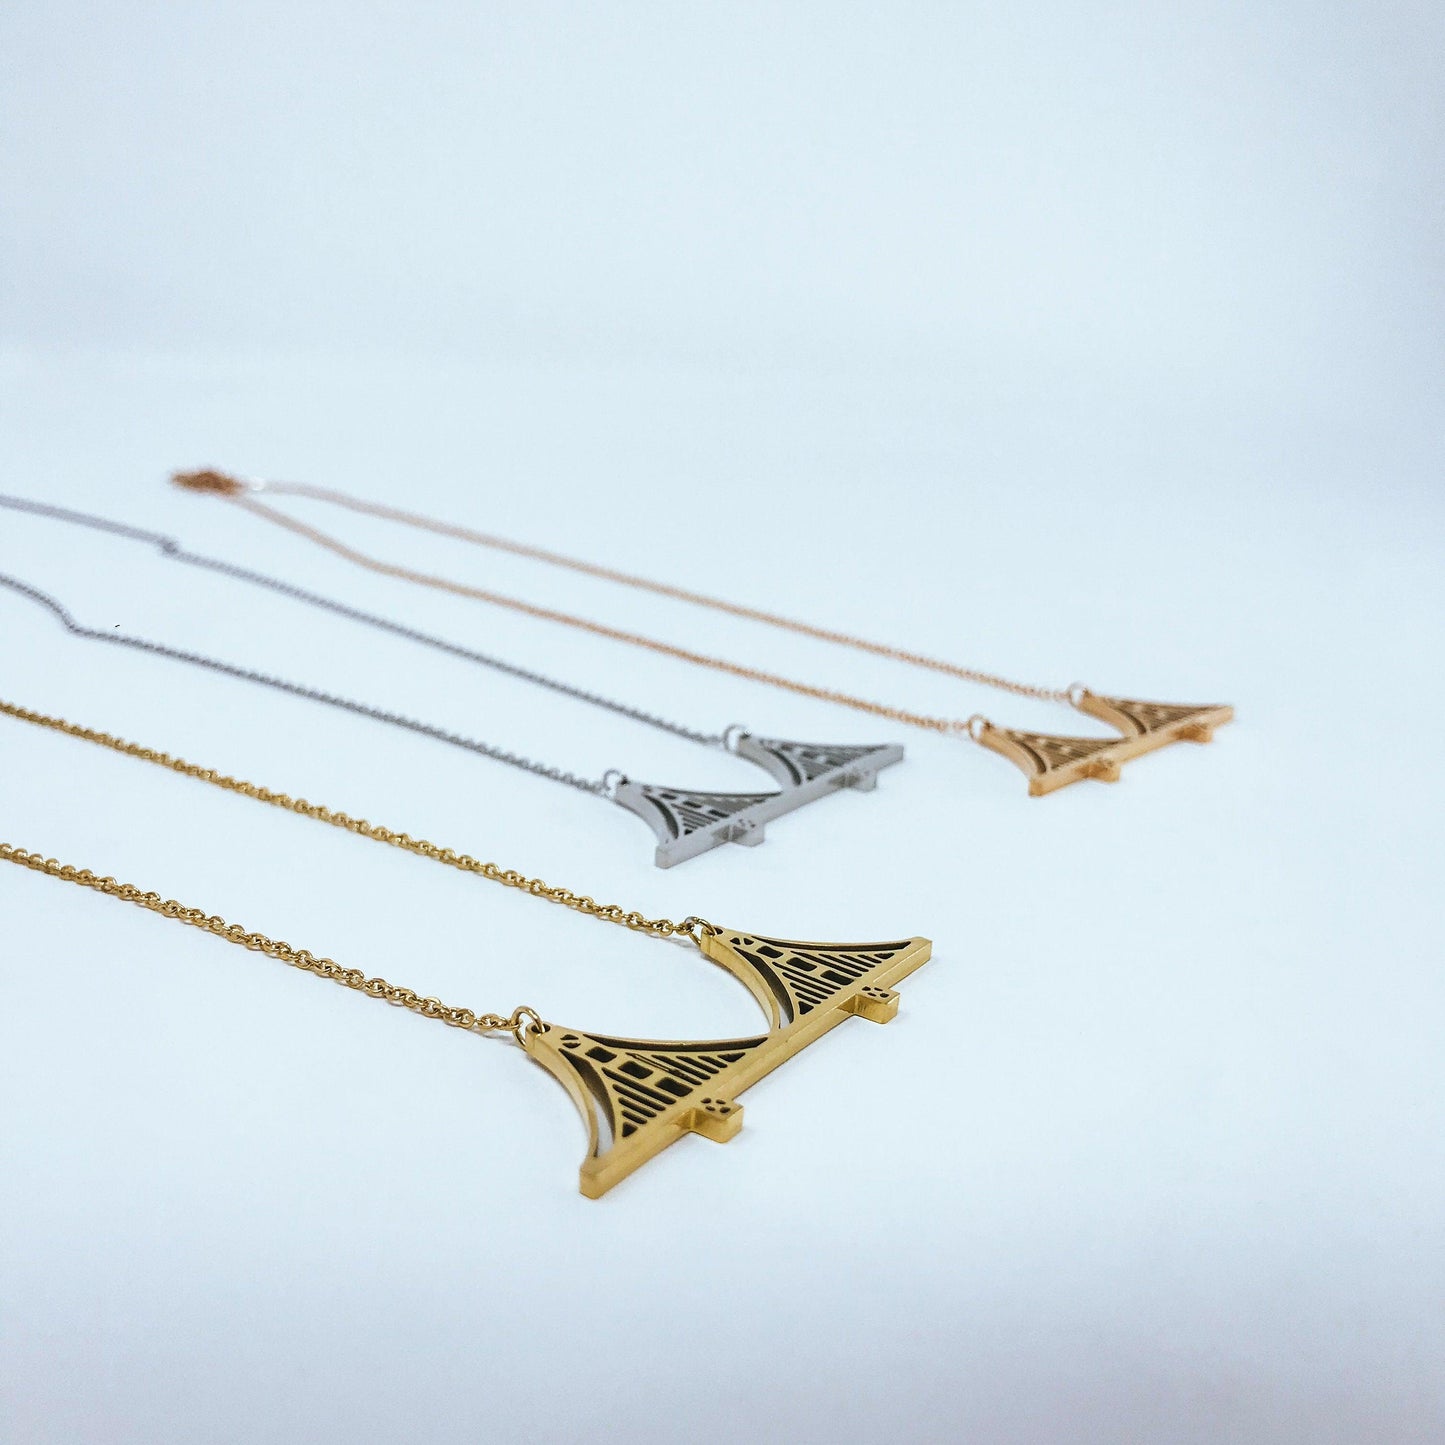 Bridge Necklaces in 3 different colors: Gold, Silver & Rose Gold